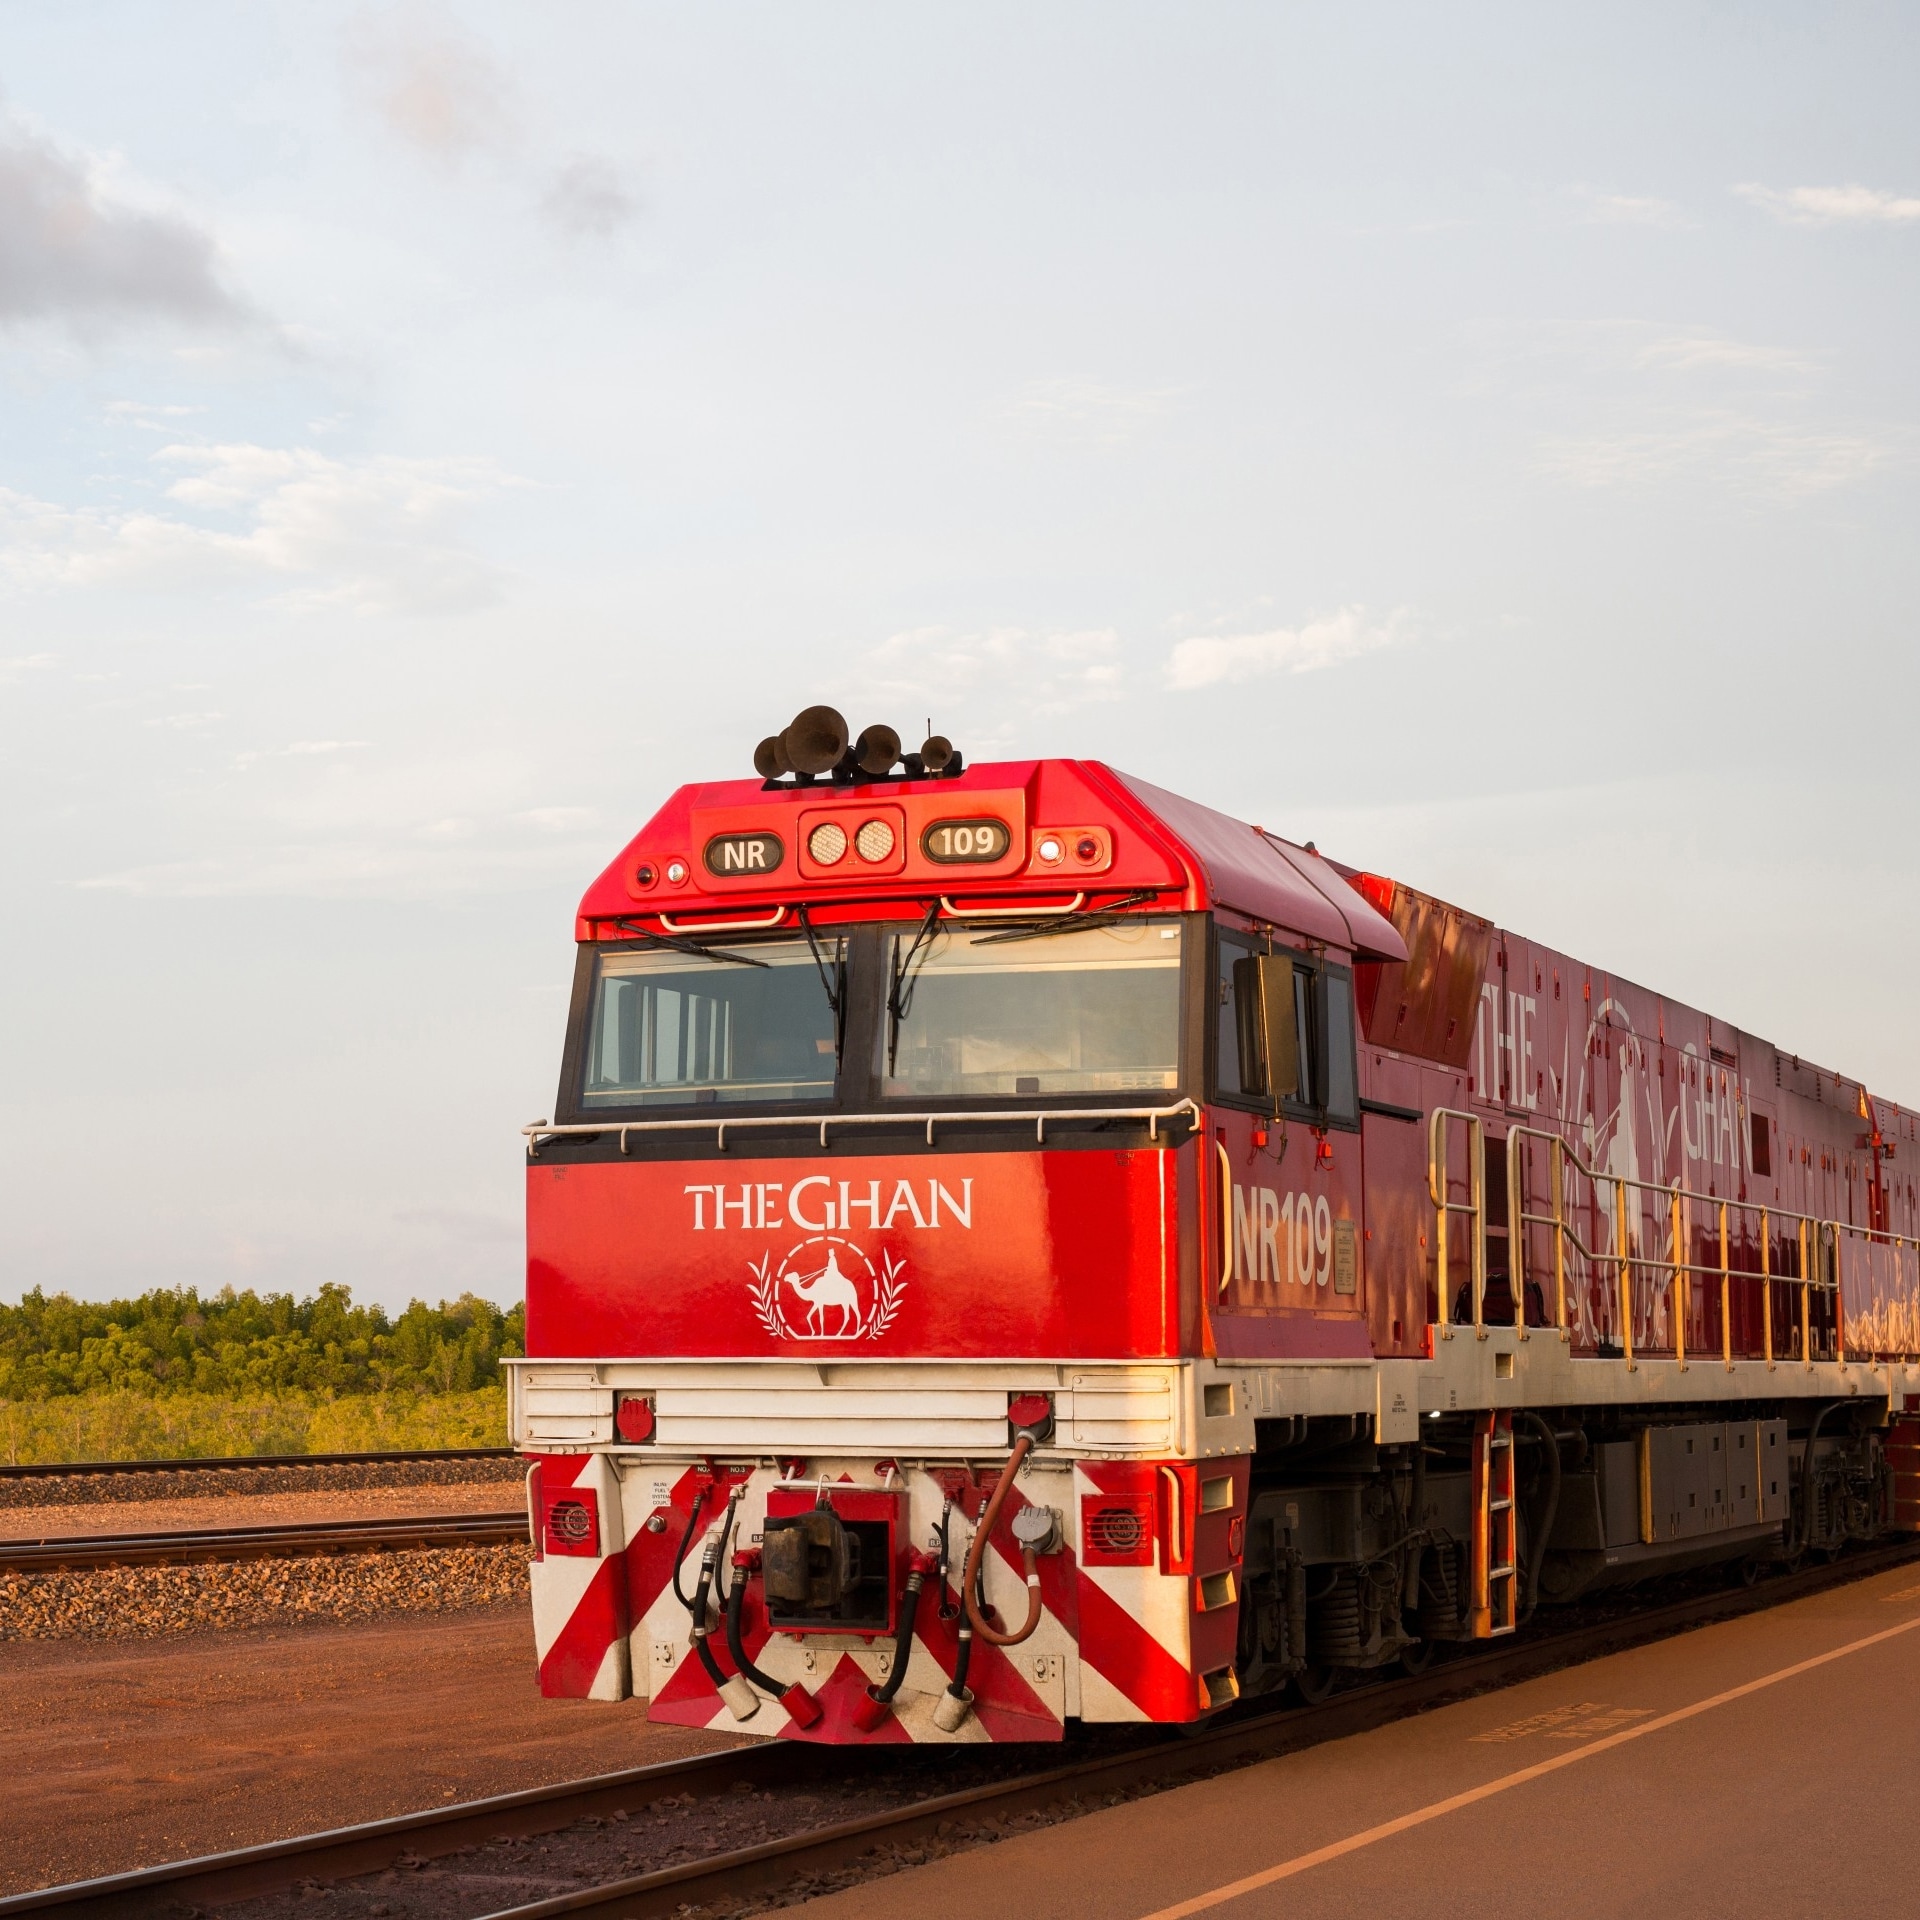 Front carriage of The Ghan train © Journey Beyond